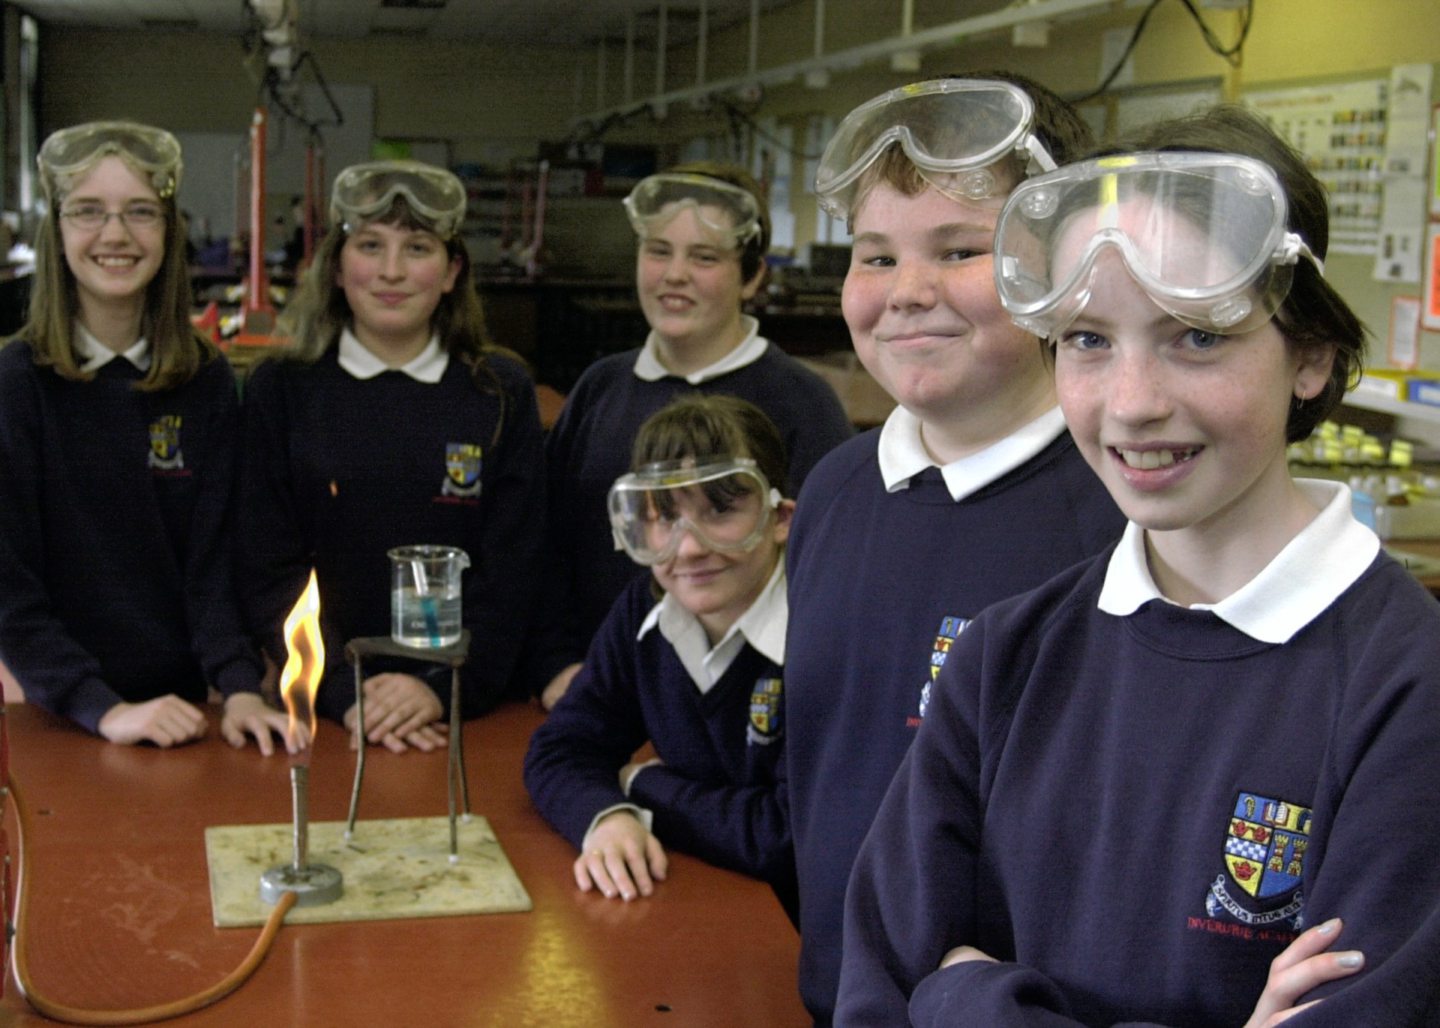 Inverurie Academy science club posing for photos with goggles on gathered around a Bunsen burner